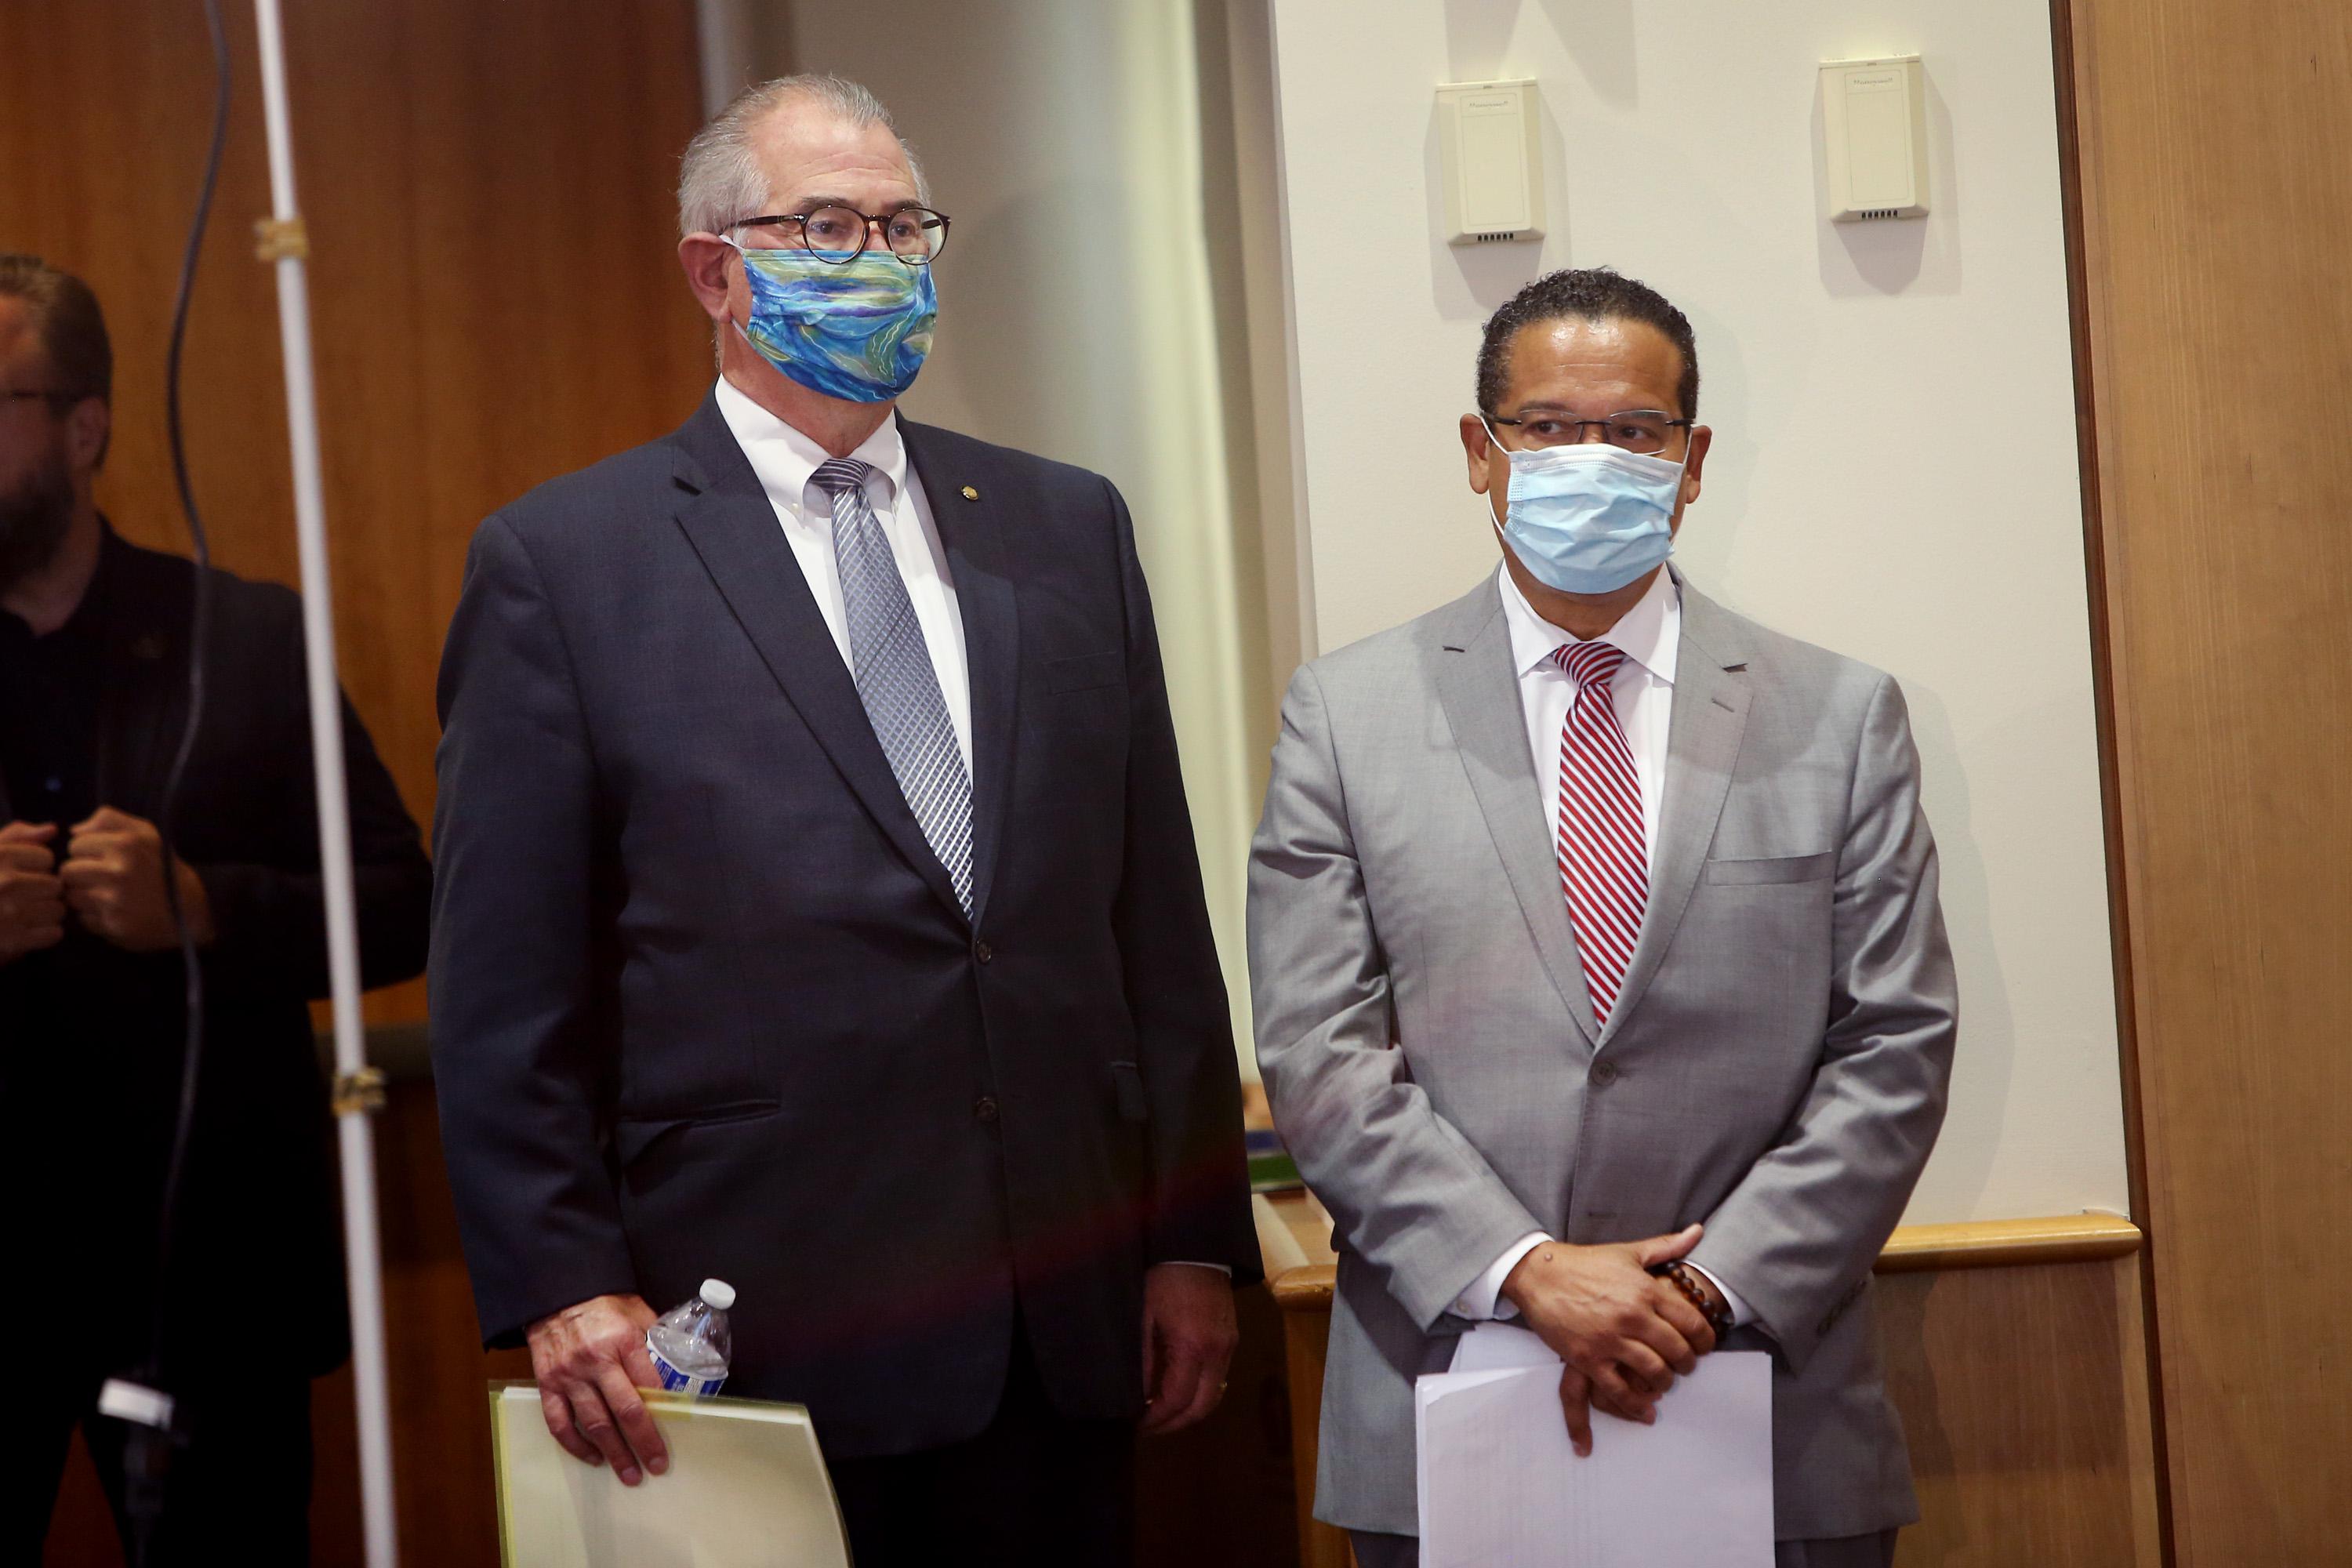 Mike Freeman and Keith Ellison stand next to each other wearing face masks.